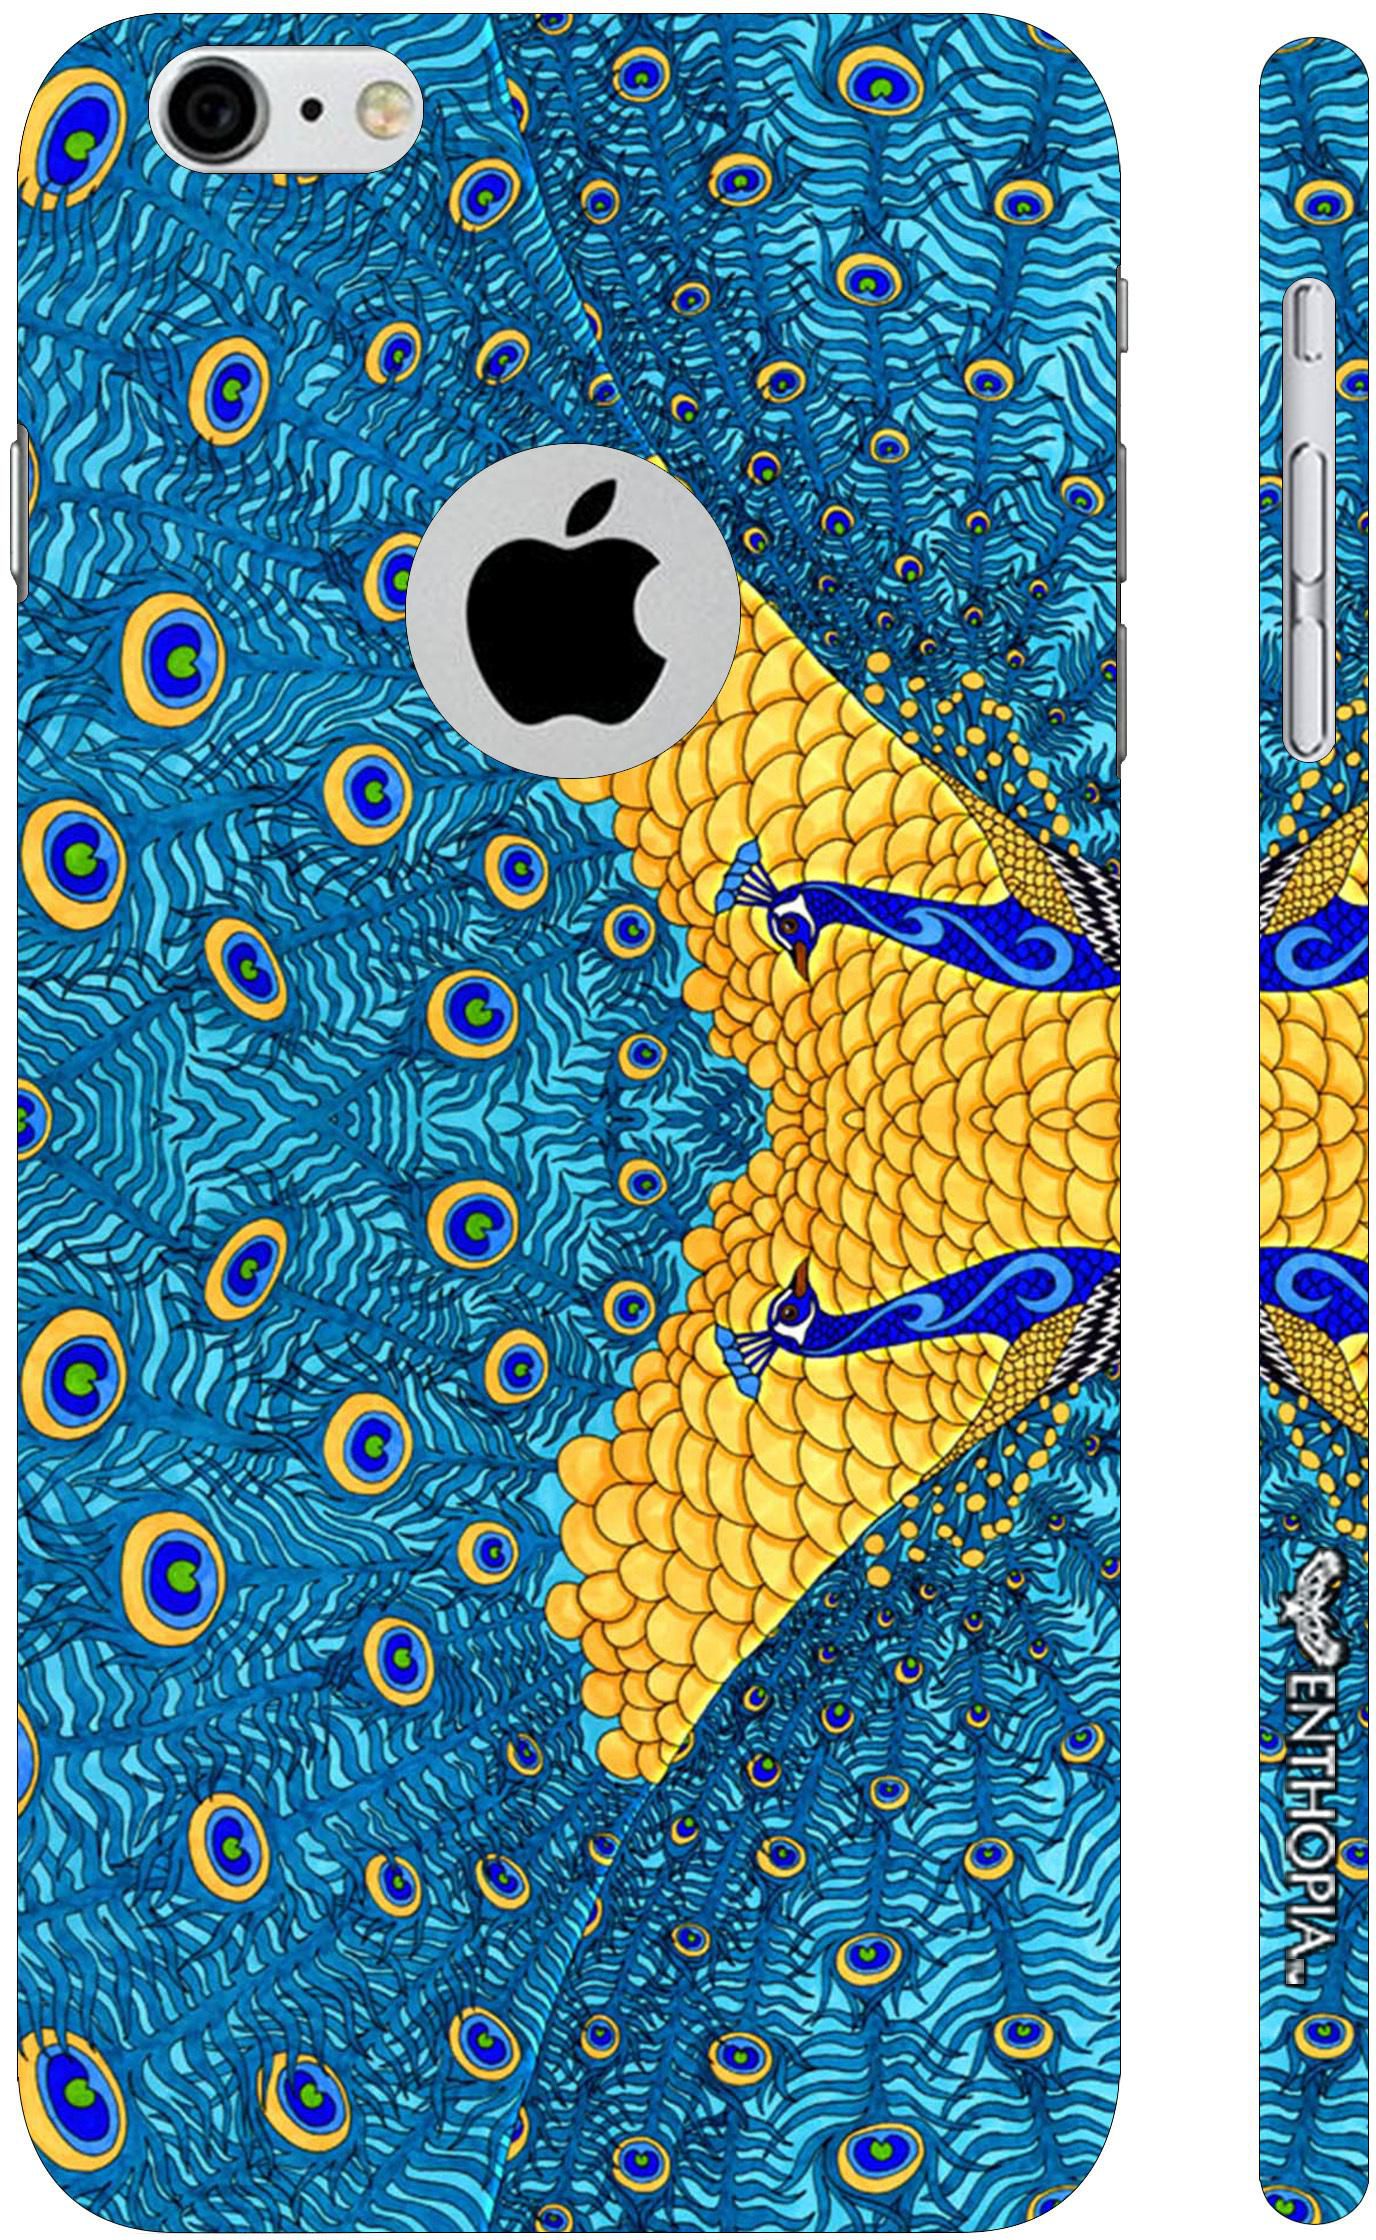 Enthopia Designer Hardshell Case The Peacock's Reflection Back Cover for Apple Iphone 6